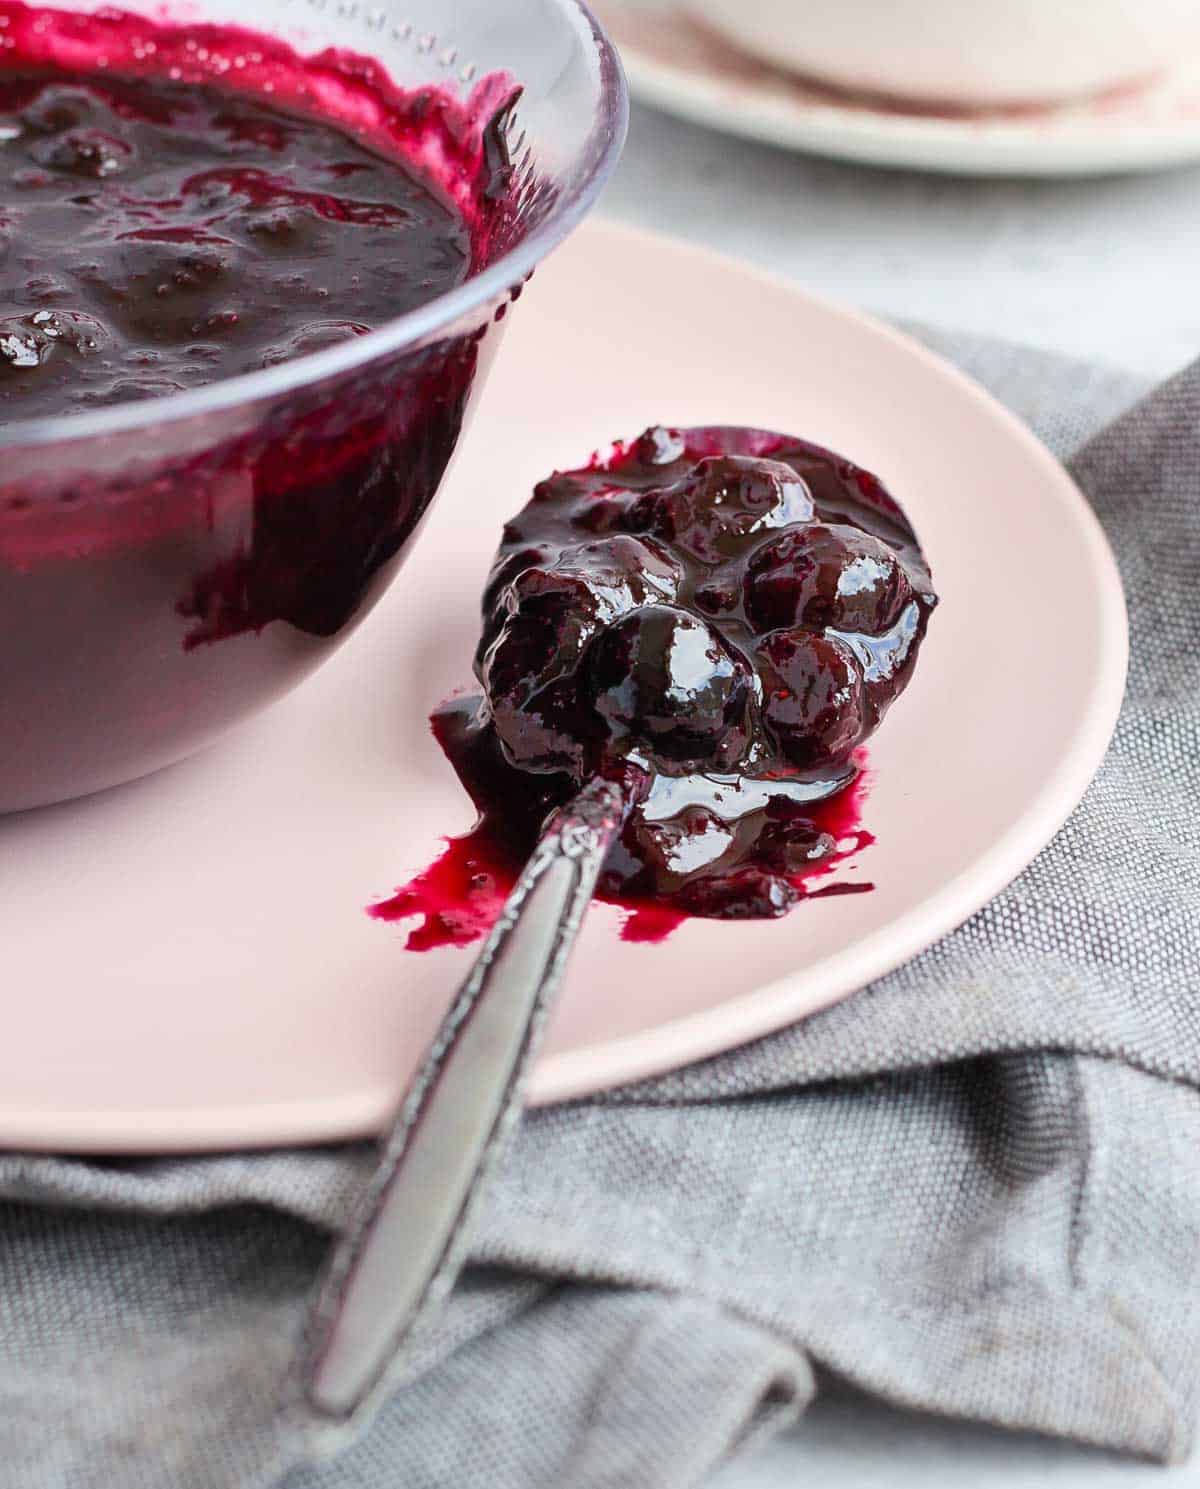 A spoon full of compote over a pink plate.